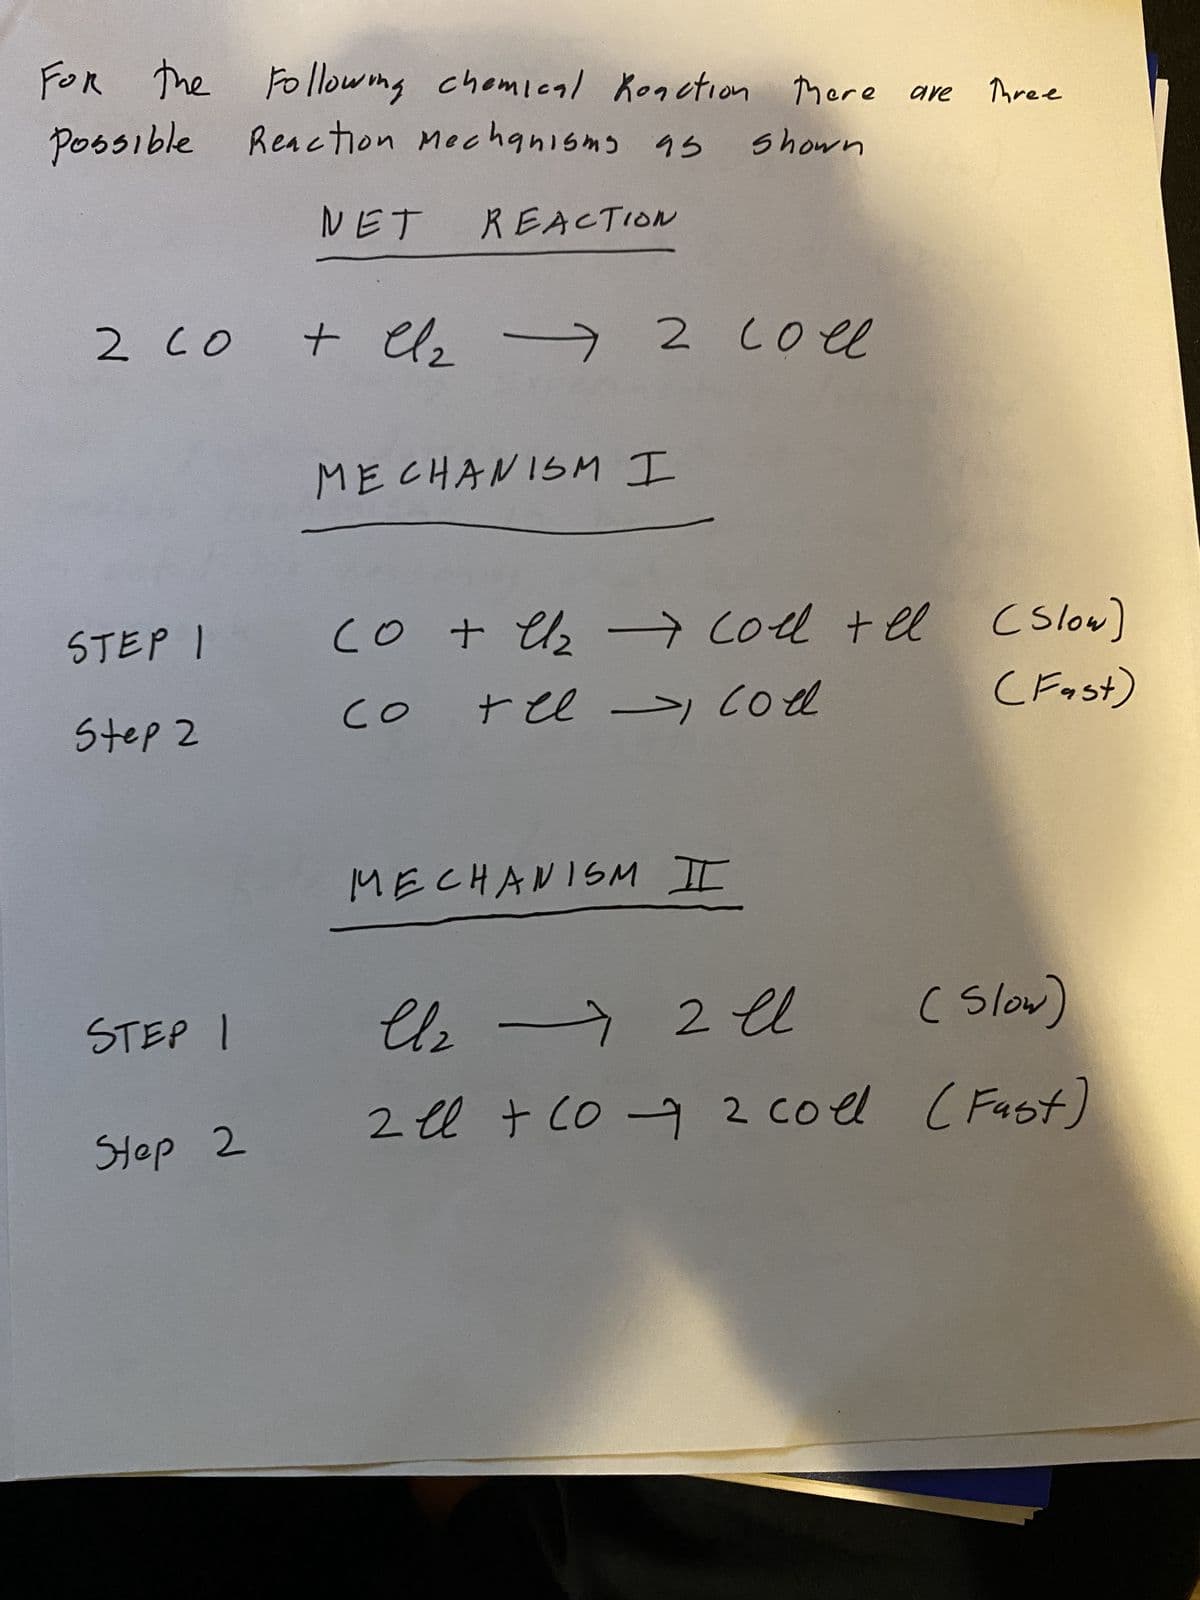 For the following chemical Konction there are
possible Reaction mechanisms as
Shown
STEP I
Step 2
NET
2 co + Cl₂ → 2 Coll
STEP 1
Step 2
REACTION
MECHANISM I
со
-
CO + Cl₂ ⇒ Coll + el C(Slow)
(Fast)
со
coel اح tee
Three
MECHANISM I
Cl₂ → 2 l
(Slow)
llz
2 ll + 10 + 2 coll (Fast)